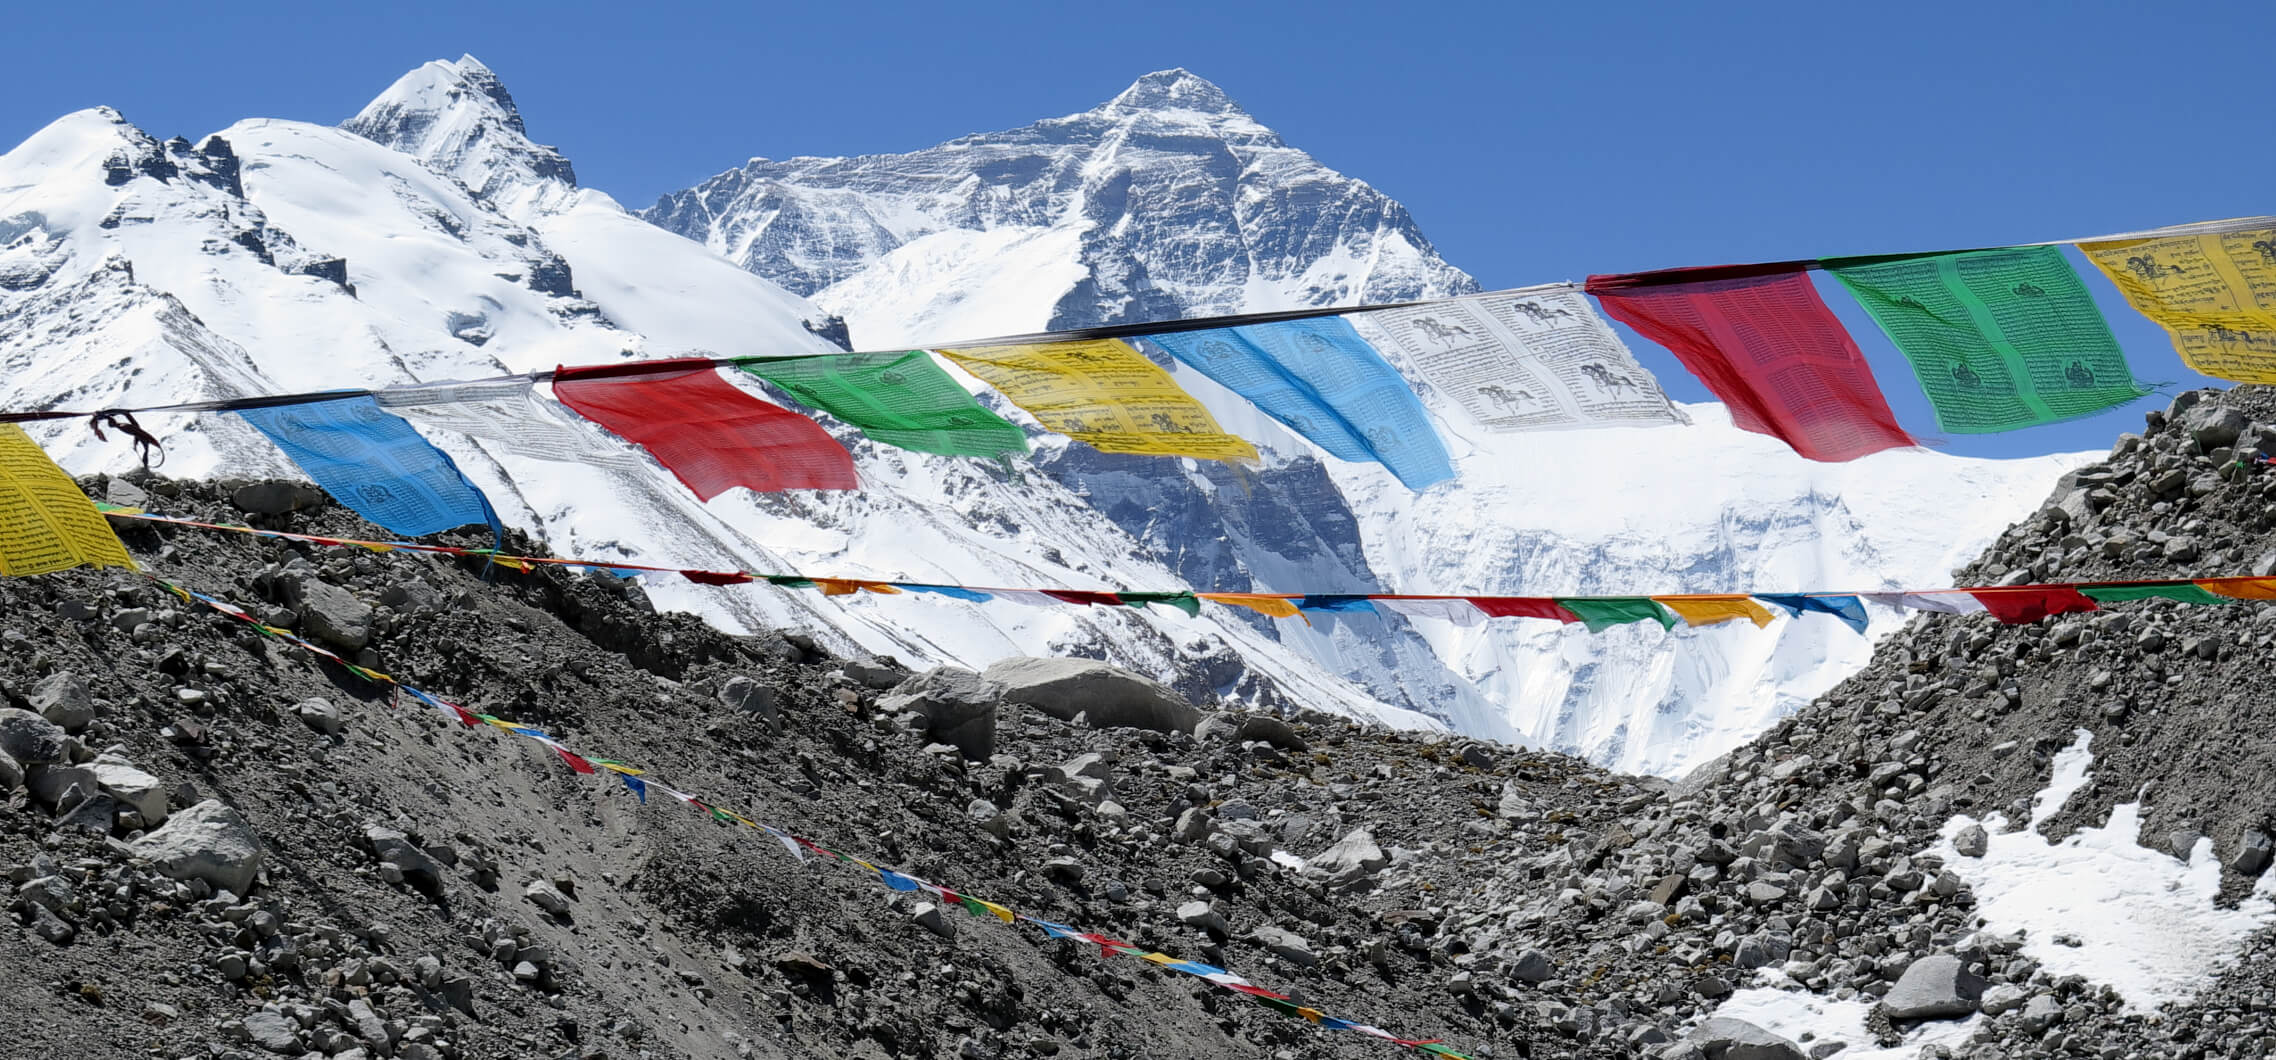 Everest in Alpine Style: Processing an Early Homecoming Image